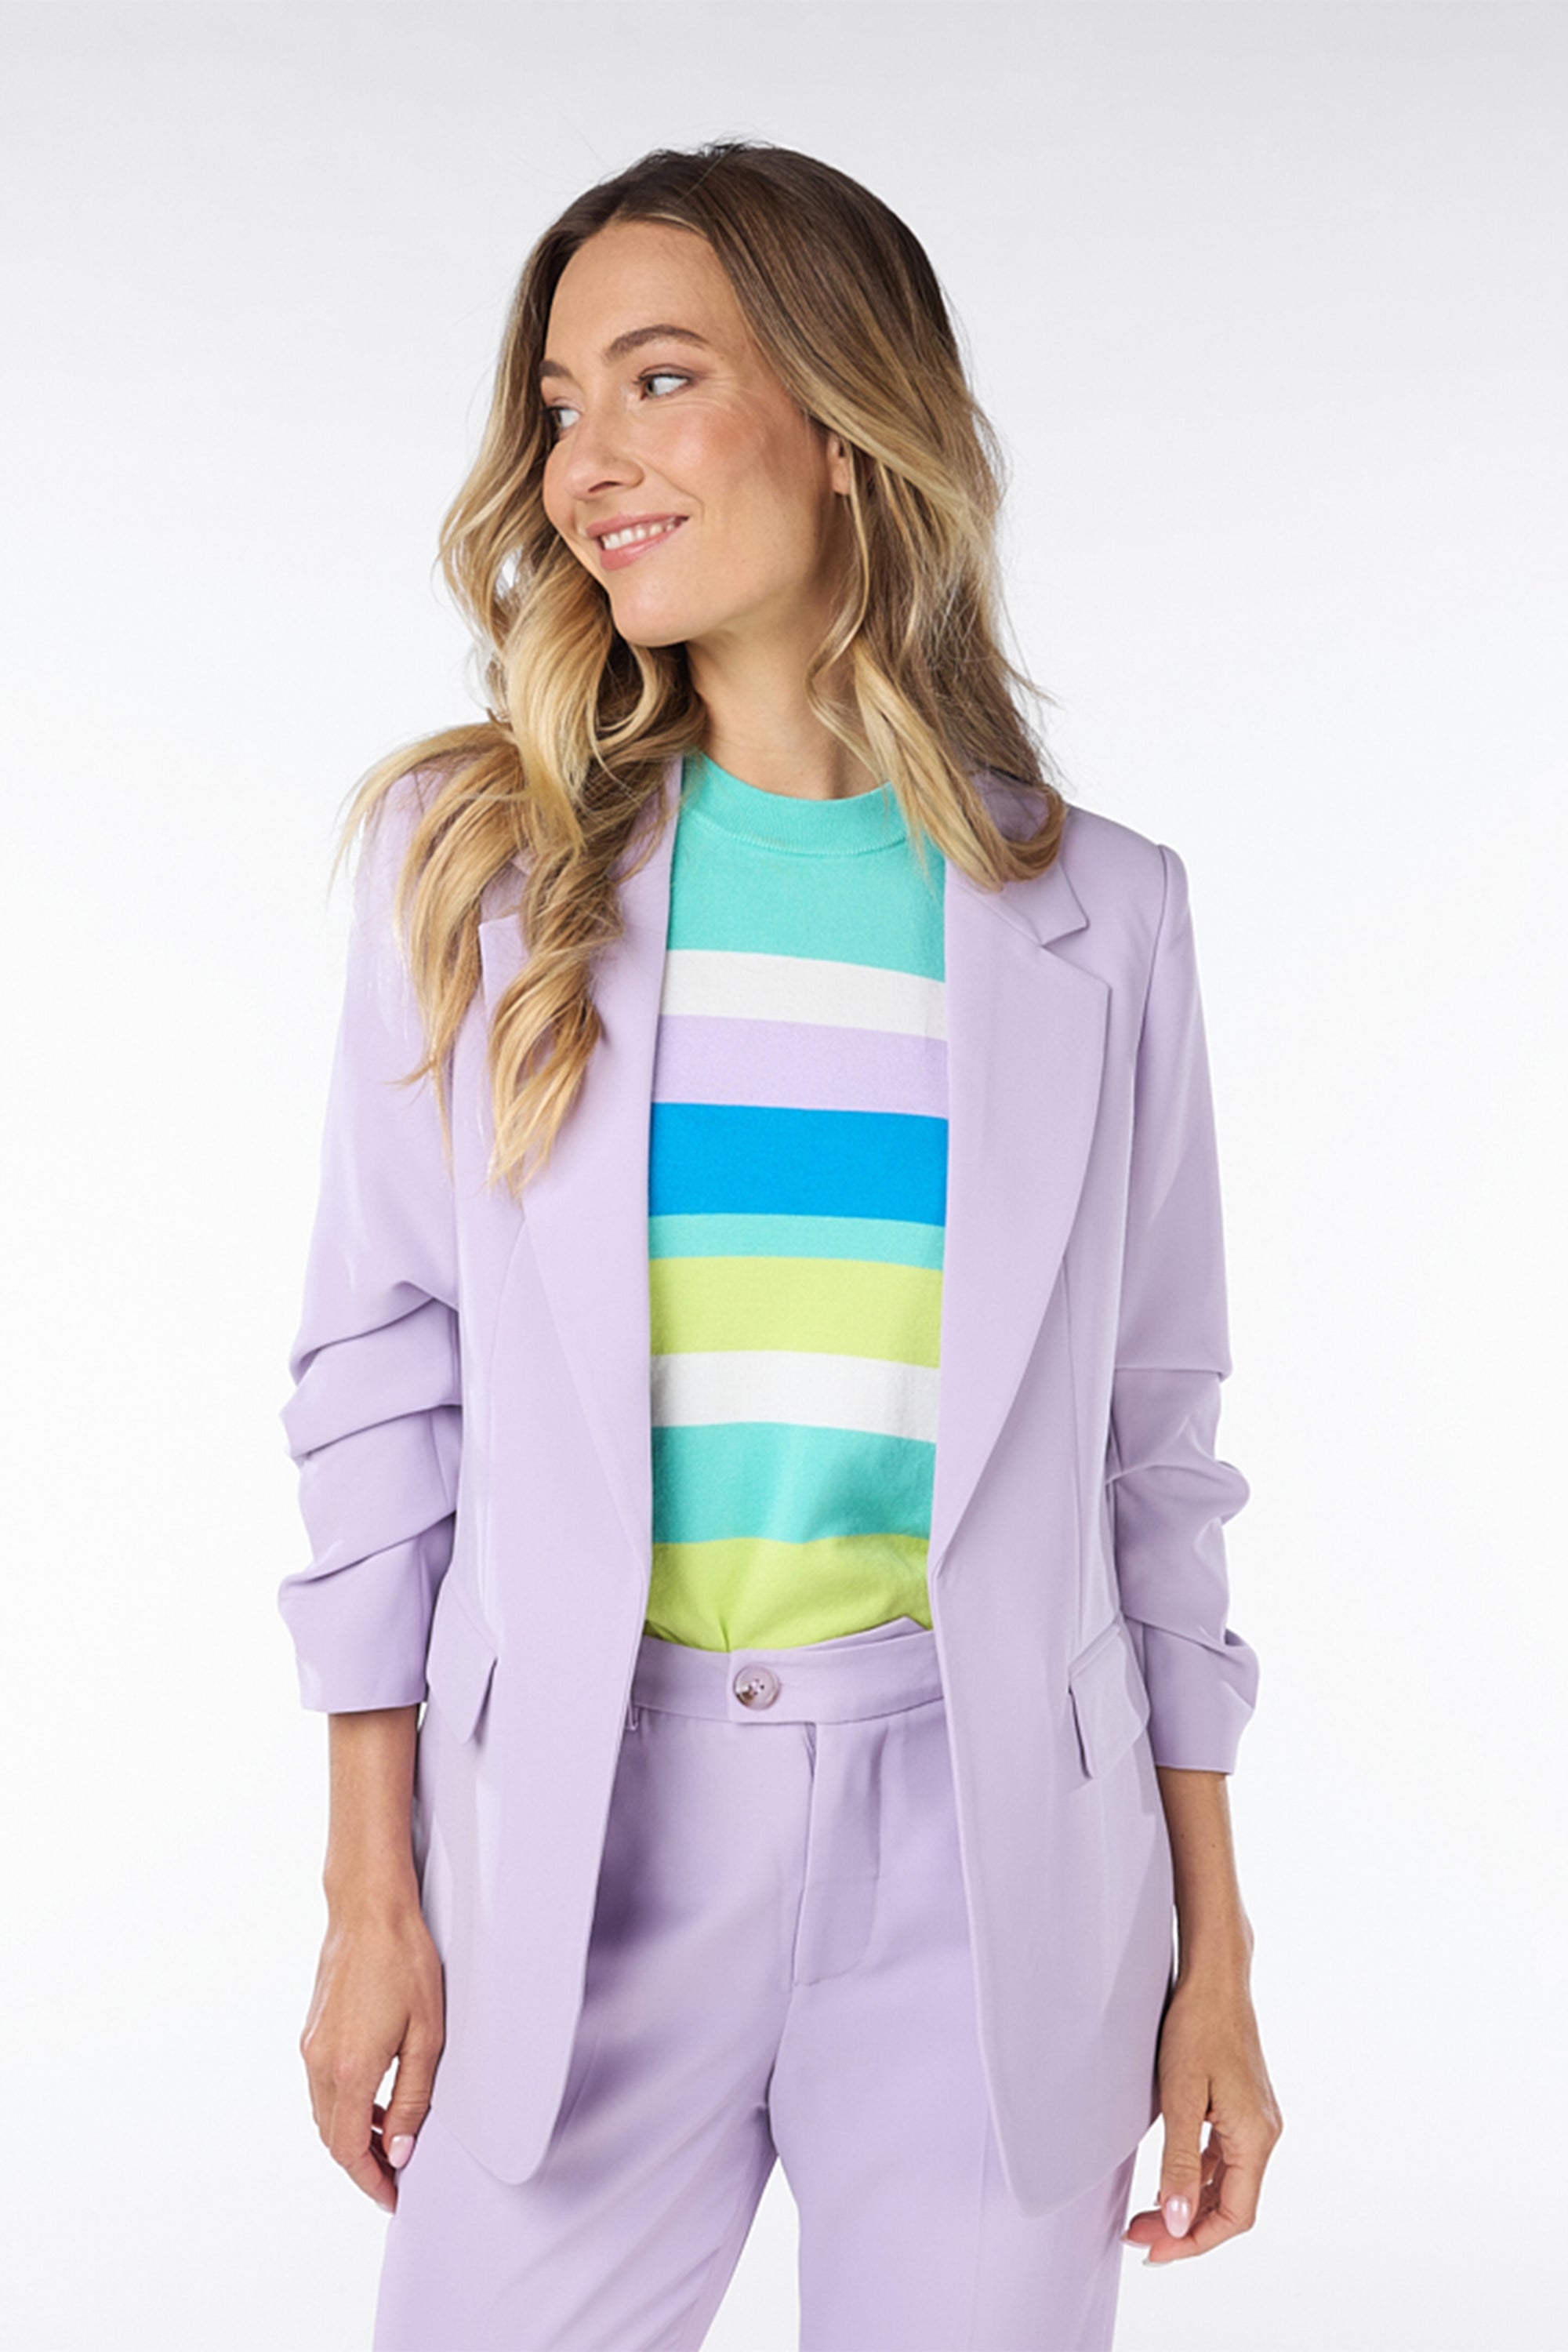 Esqulao (SP2410023) Women's Ruched 3/4 Sleeve Open Front Blazer with Flap Pockets in Lilac Purple